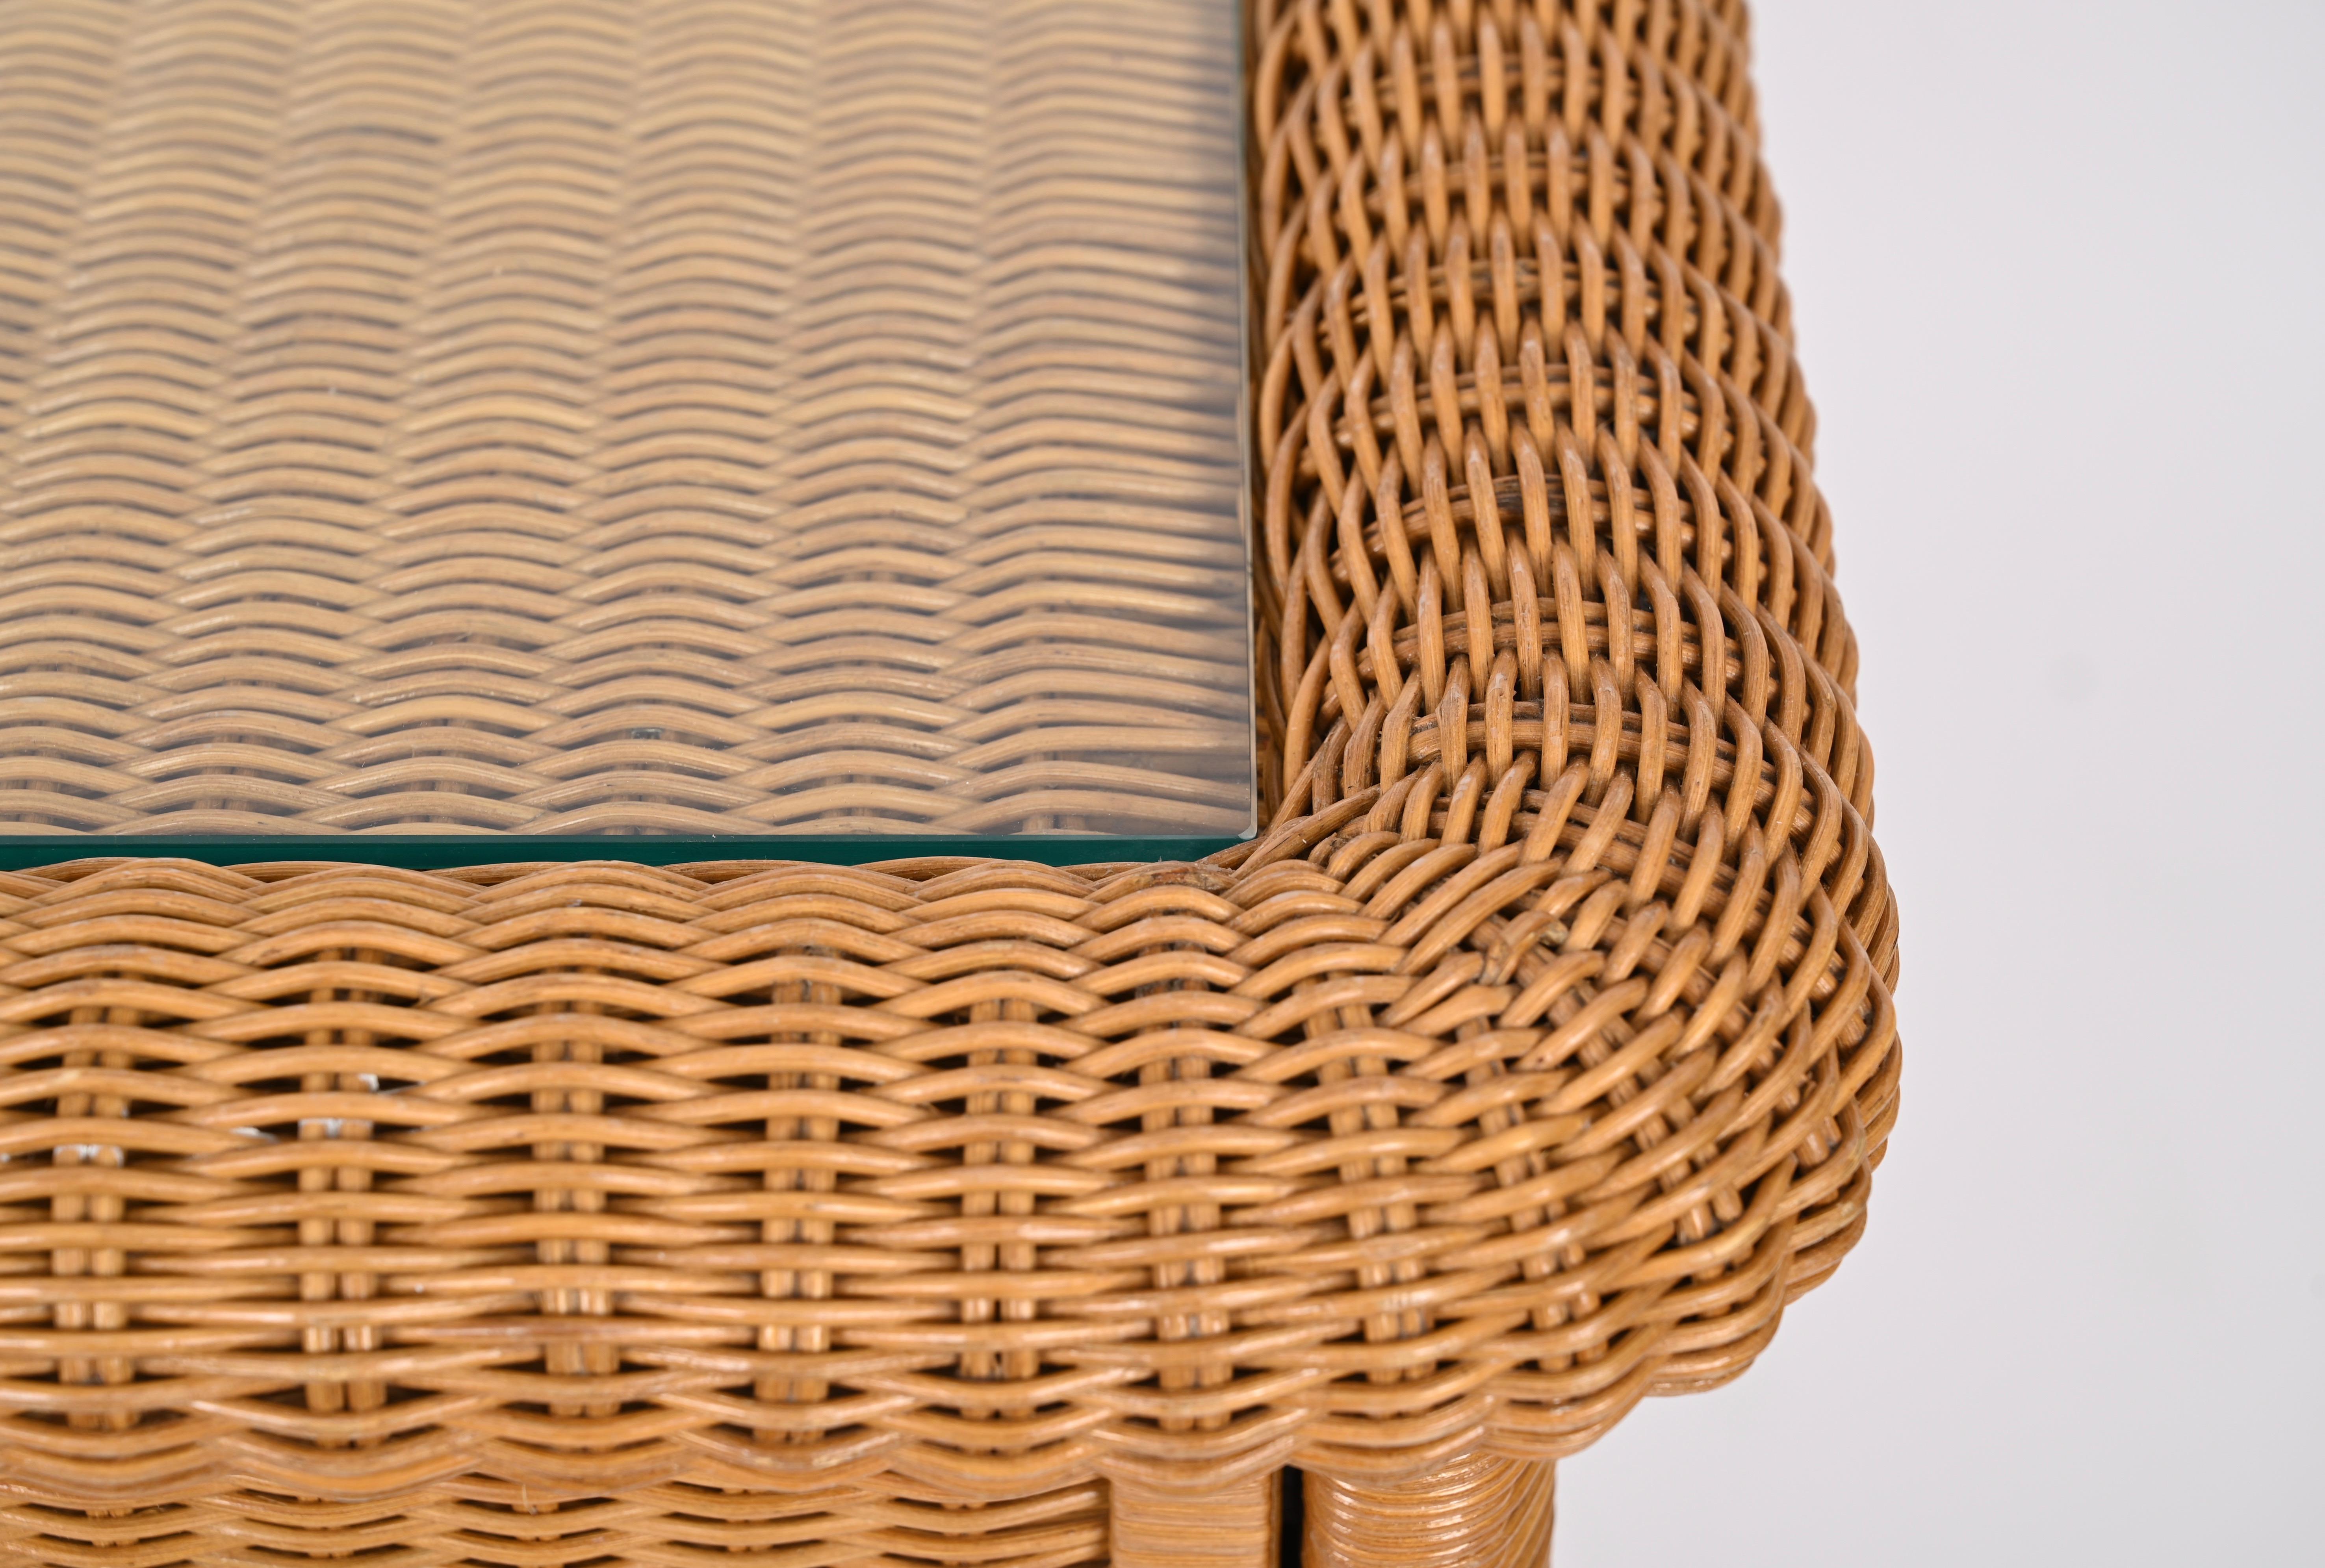 French Riviera Chest of Drawers in Woven Rattan by Vivai del Sud, Italy, 1970s For Sale 3